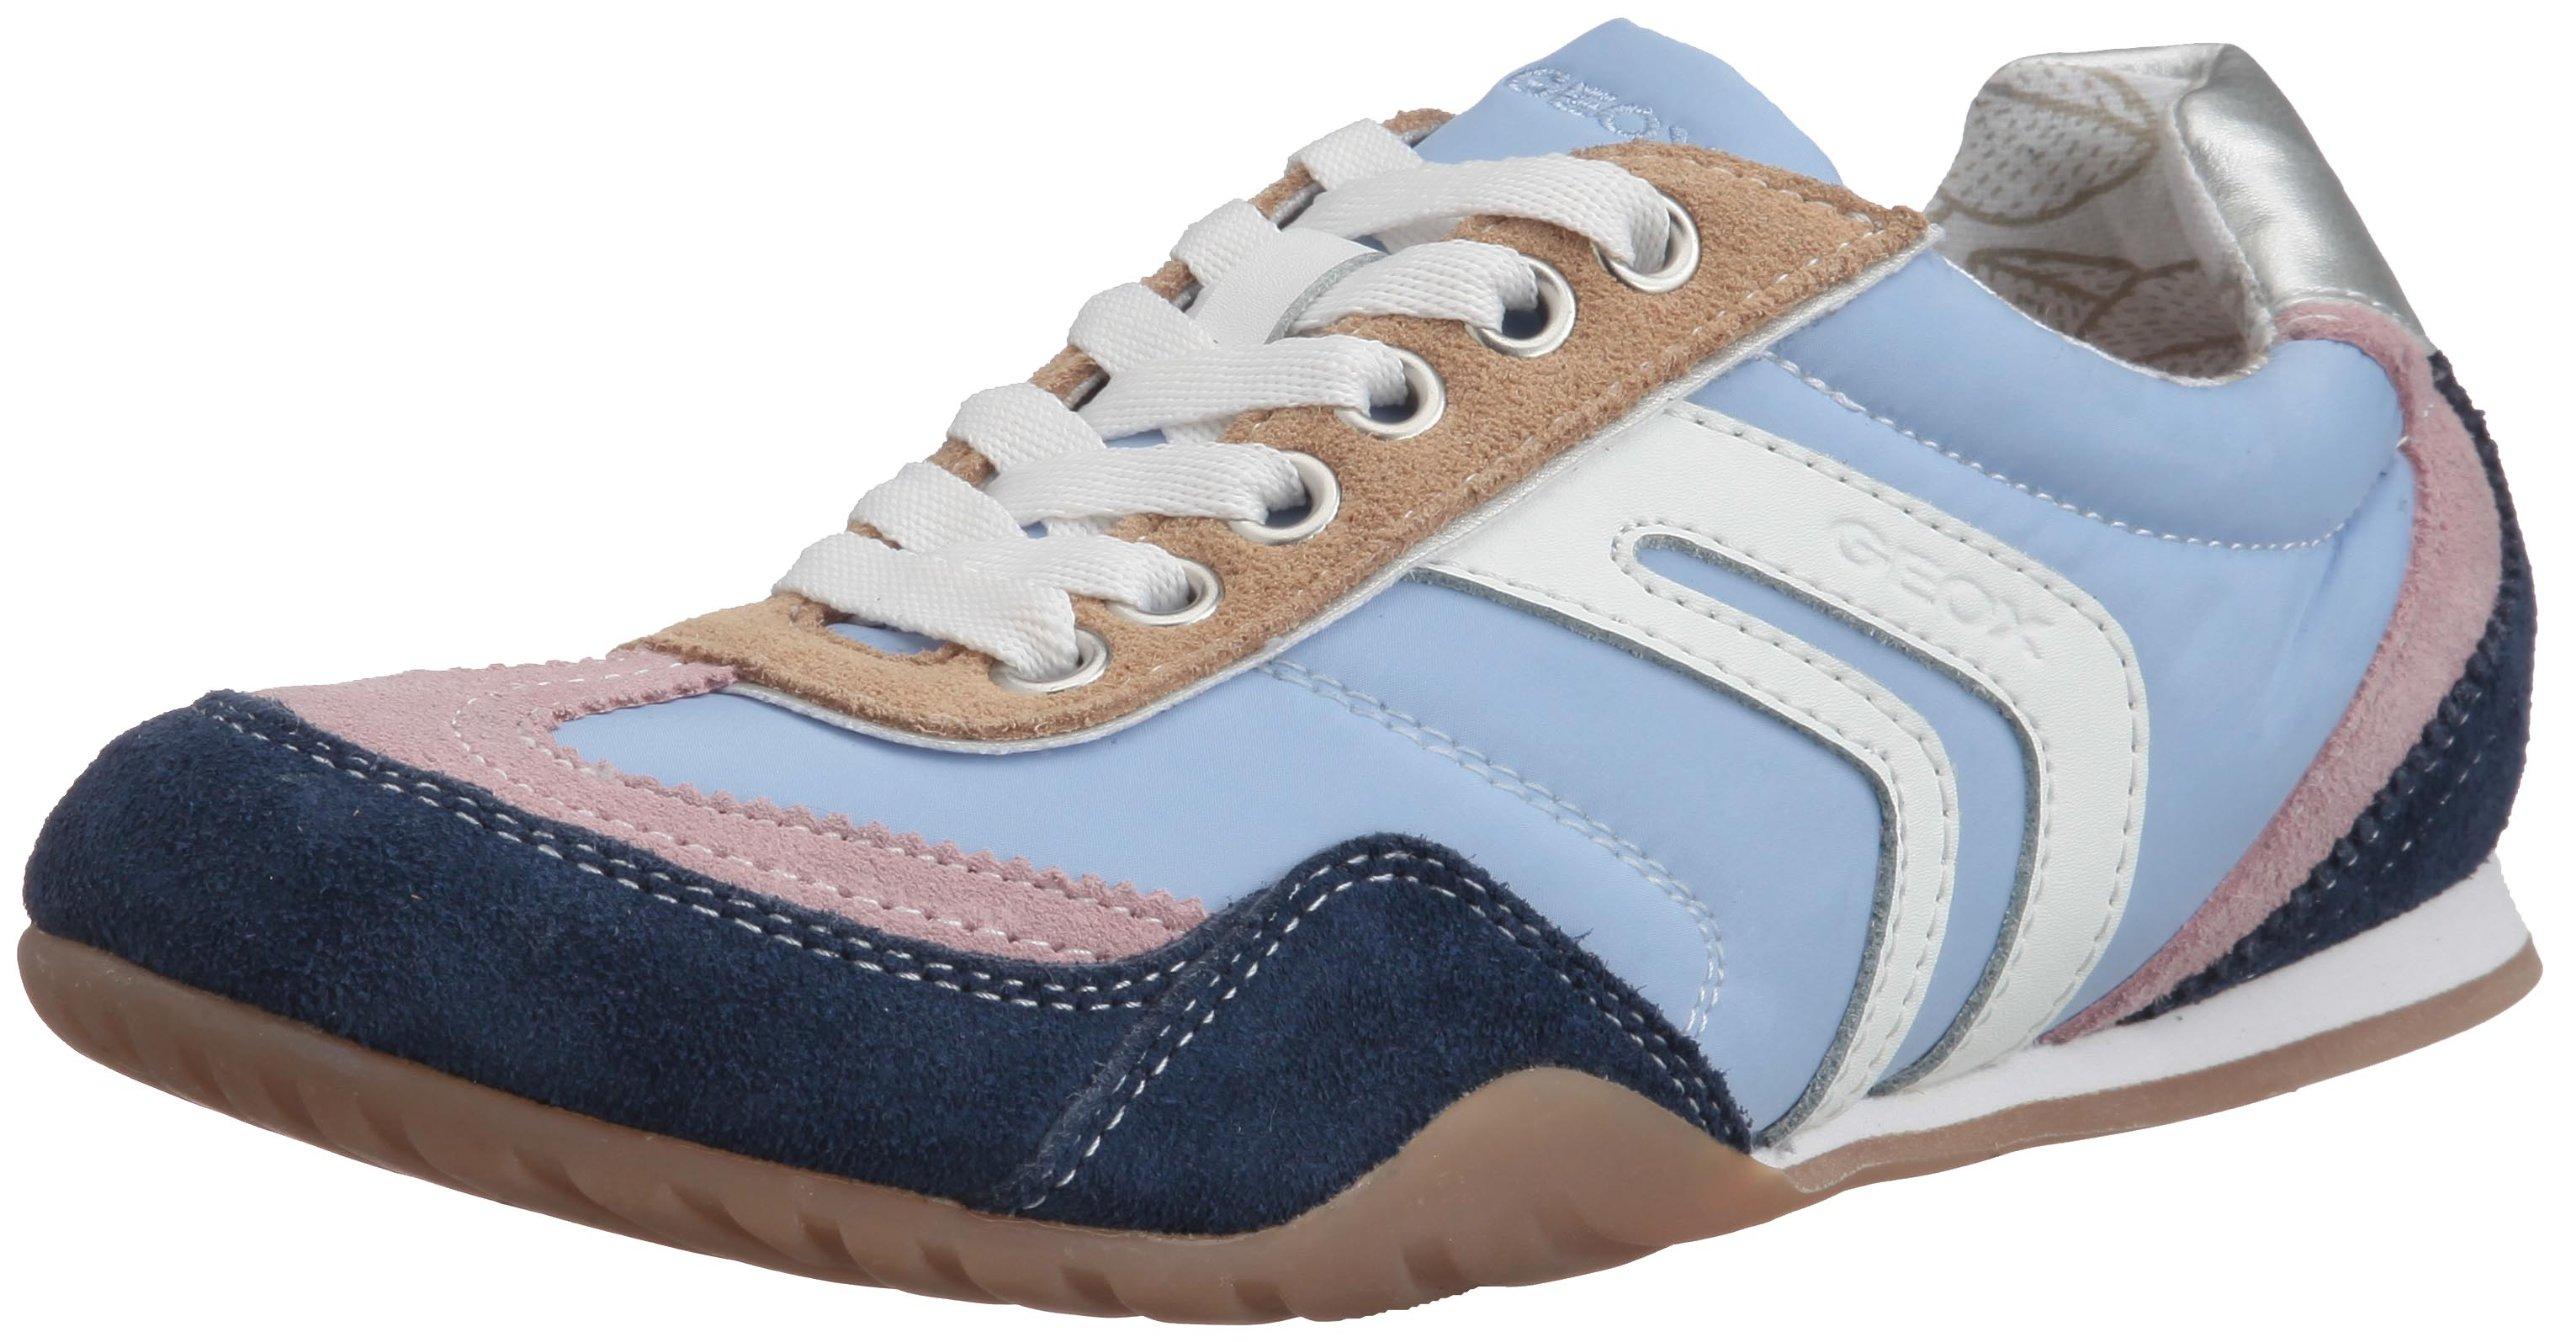 Geox 's Donna Triade 1 Lace-up Fashion Sneaker,light Blue/navy,37 Eu/7 M Us  | Lyst